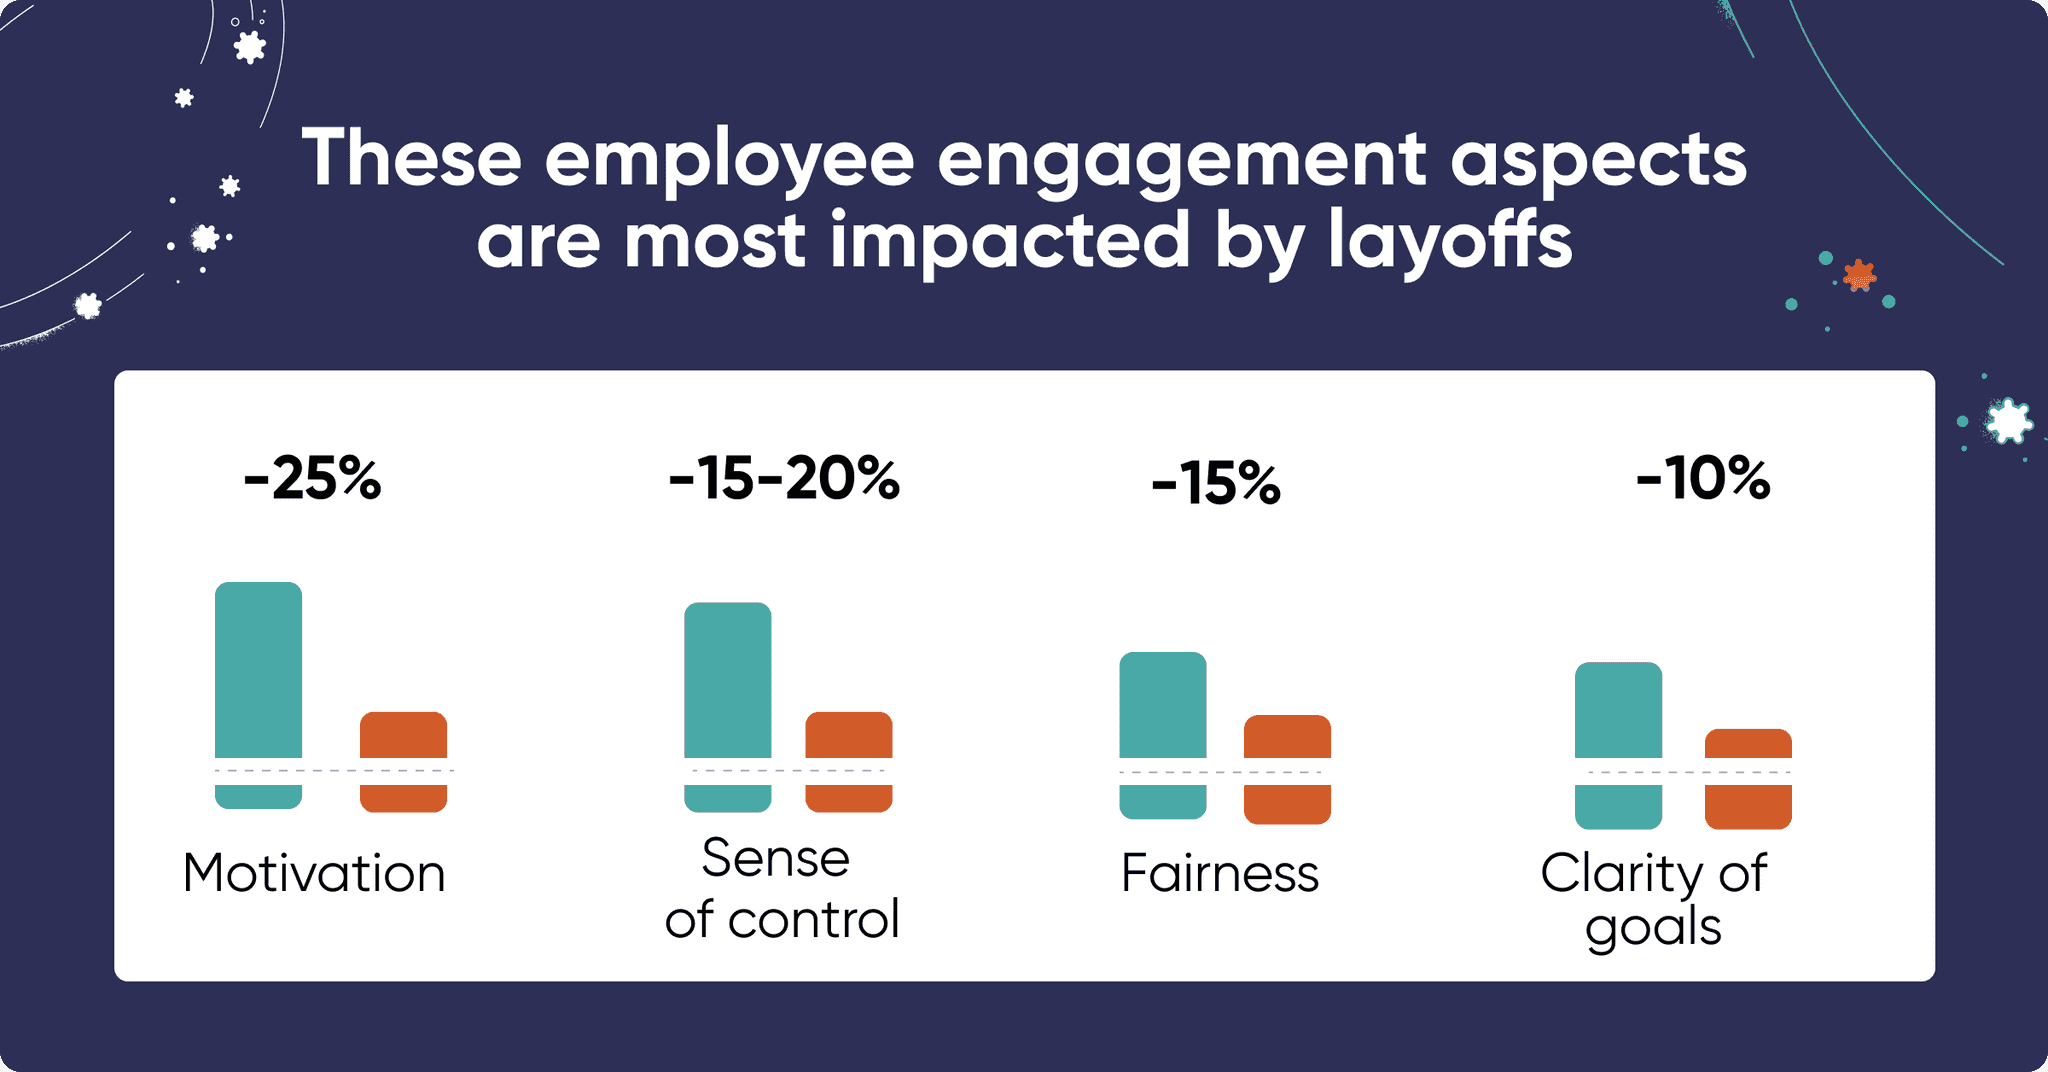 Bar charts displaying the impact of layoffs on employee motivation, sense of control, fairness and clarity of goals.